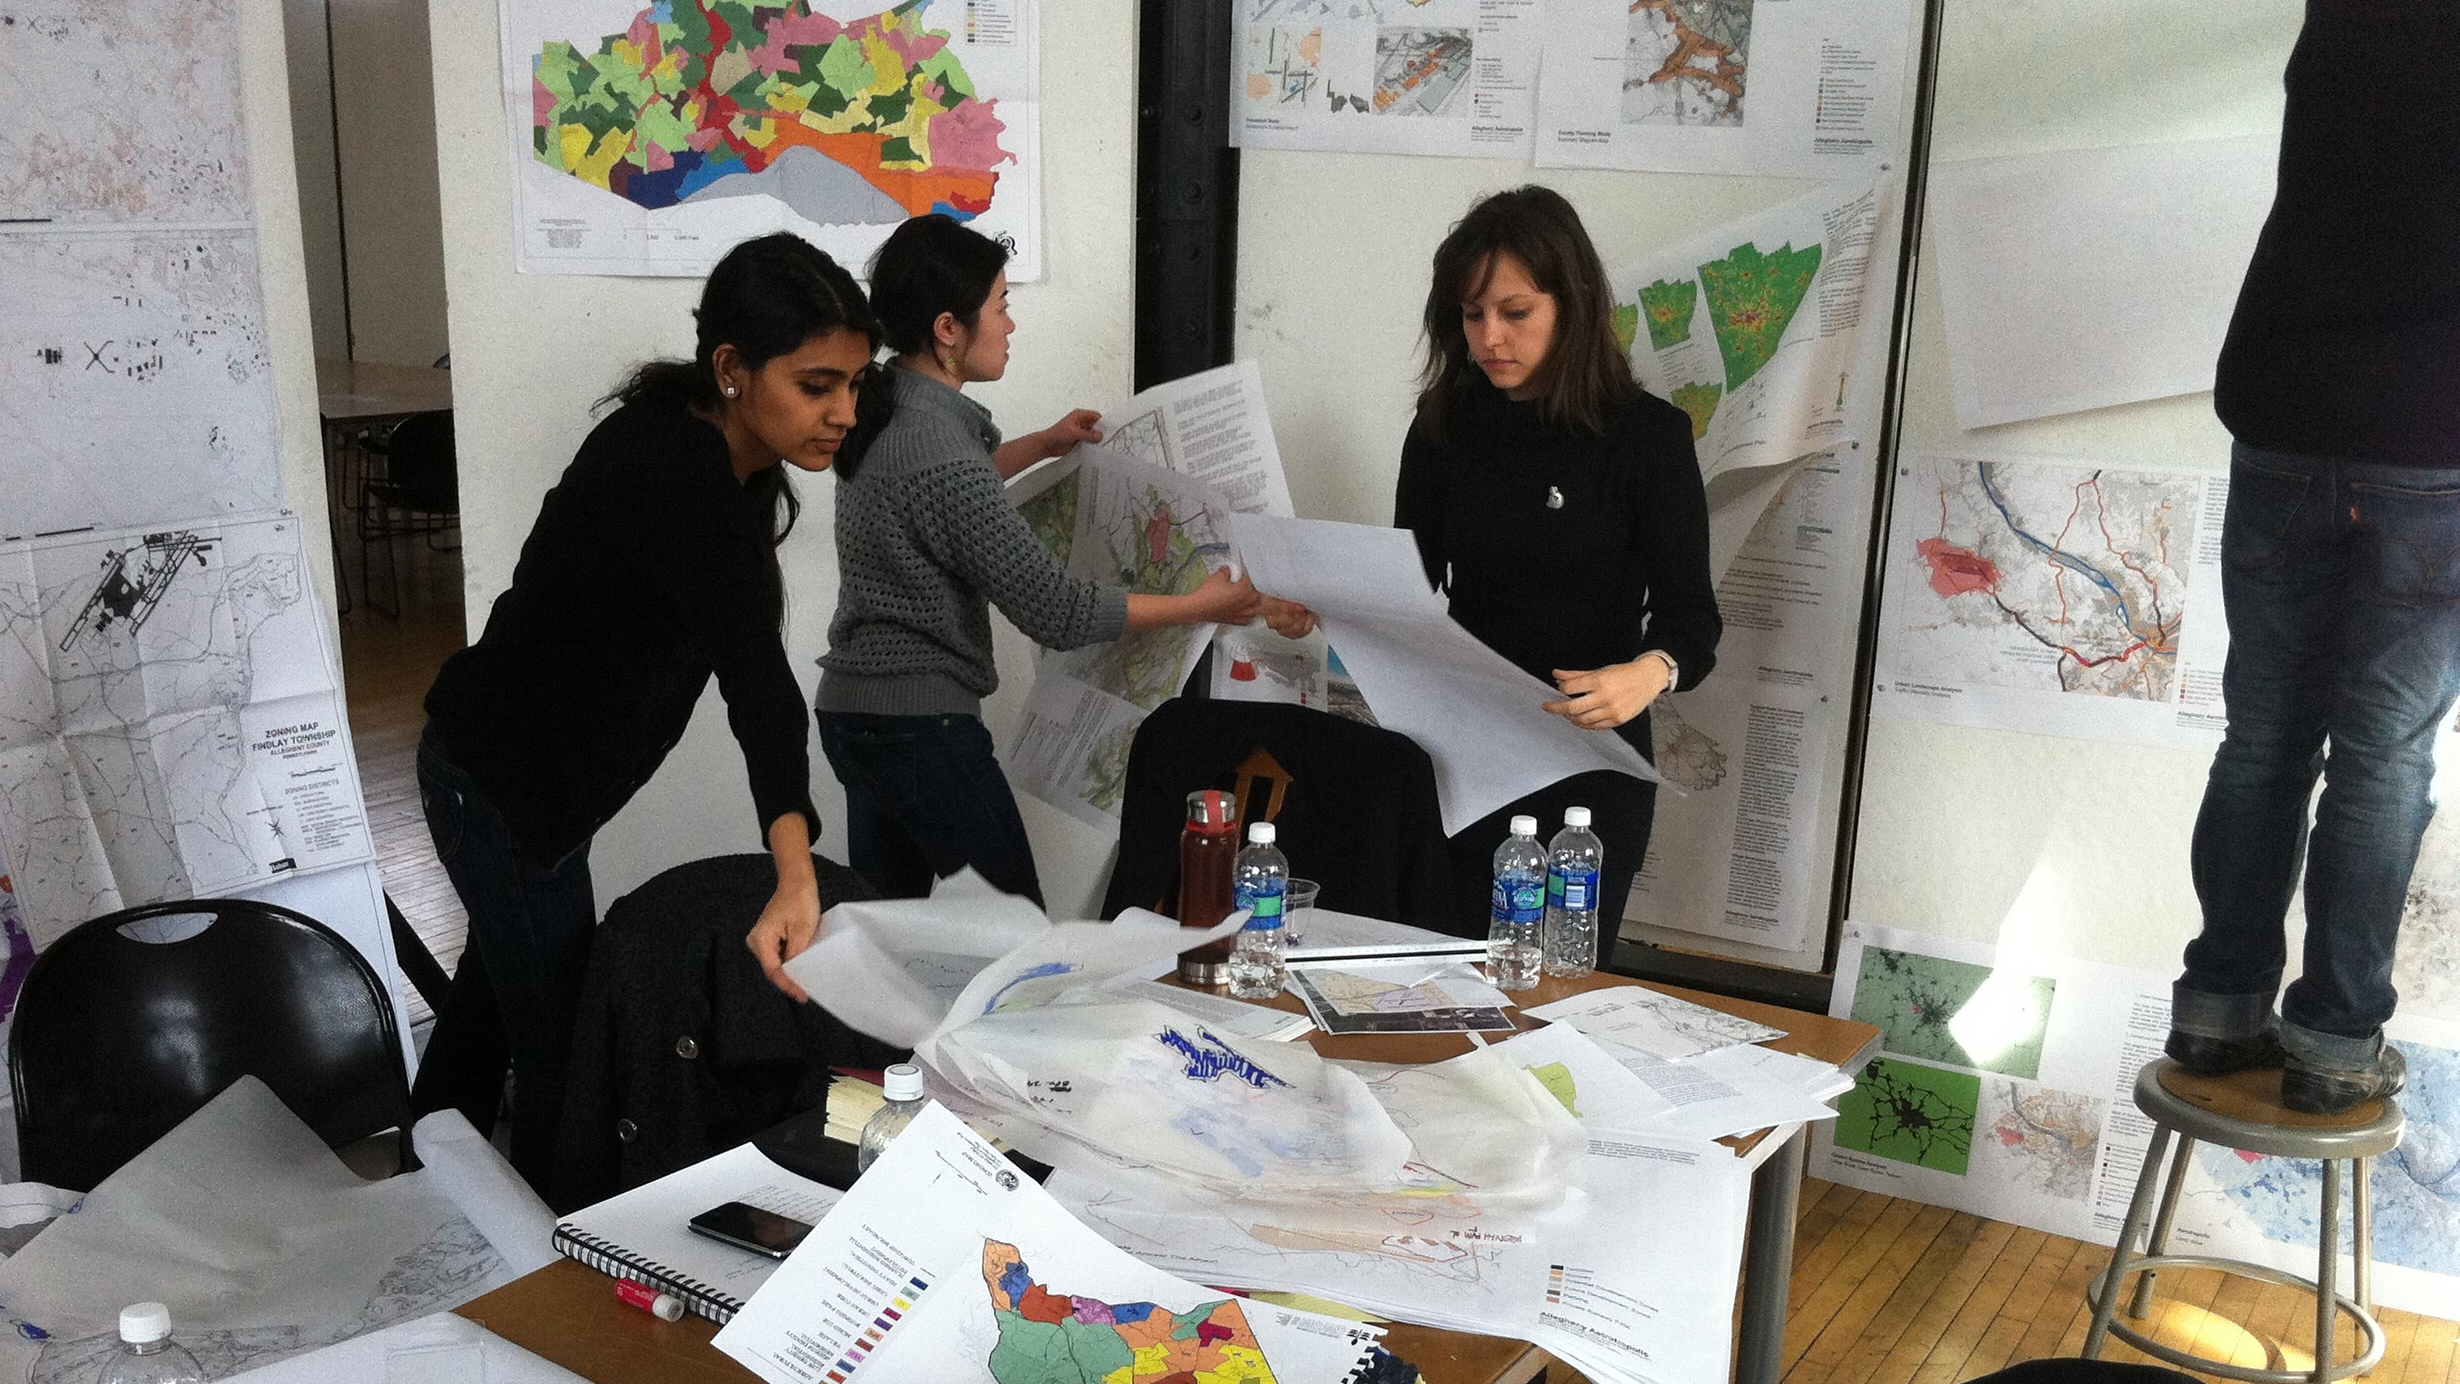 19_MUD_EXP14_Rambha Seth, Mingming Wu and Ozge Diler participating in a charrette on Pittsburgh’s airport_2011.jpg